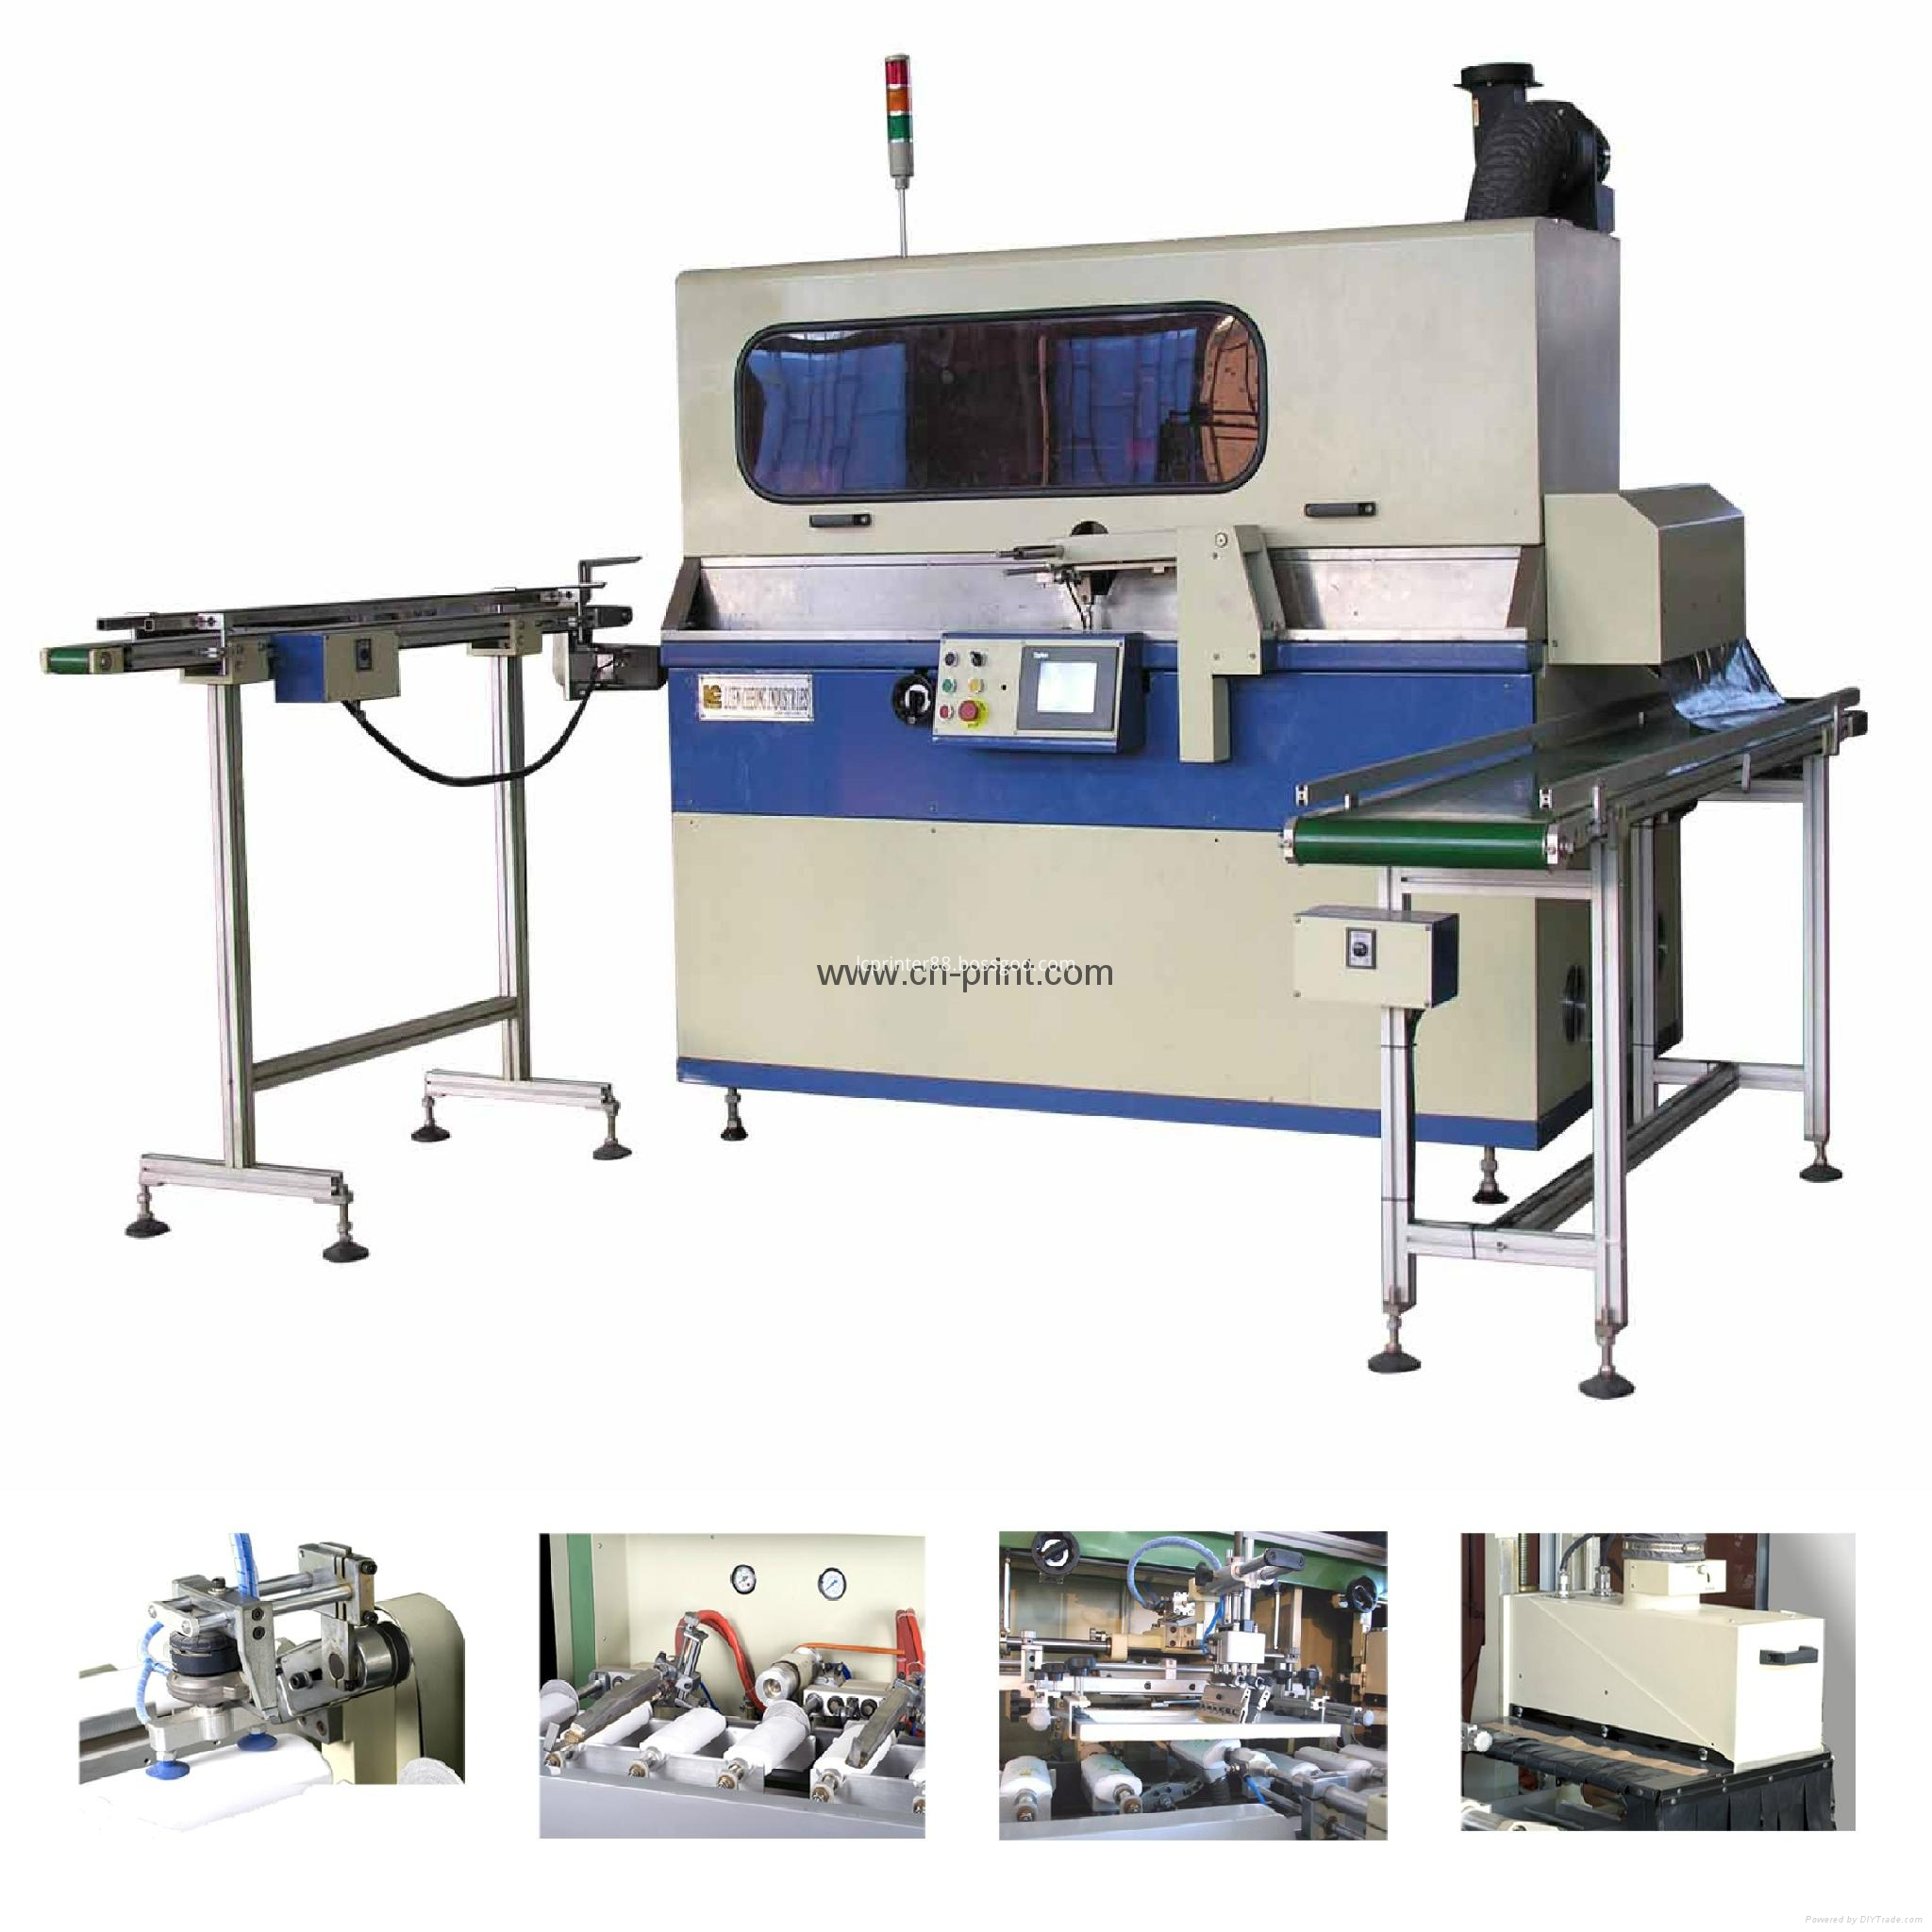 Full-Automatic Cans Screen Printer with UV Drying System